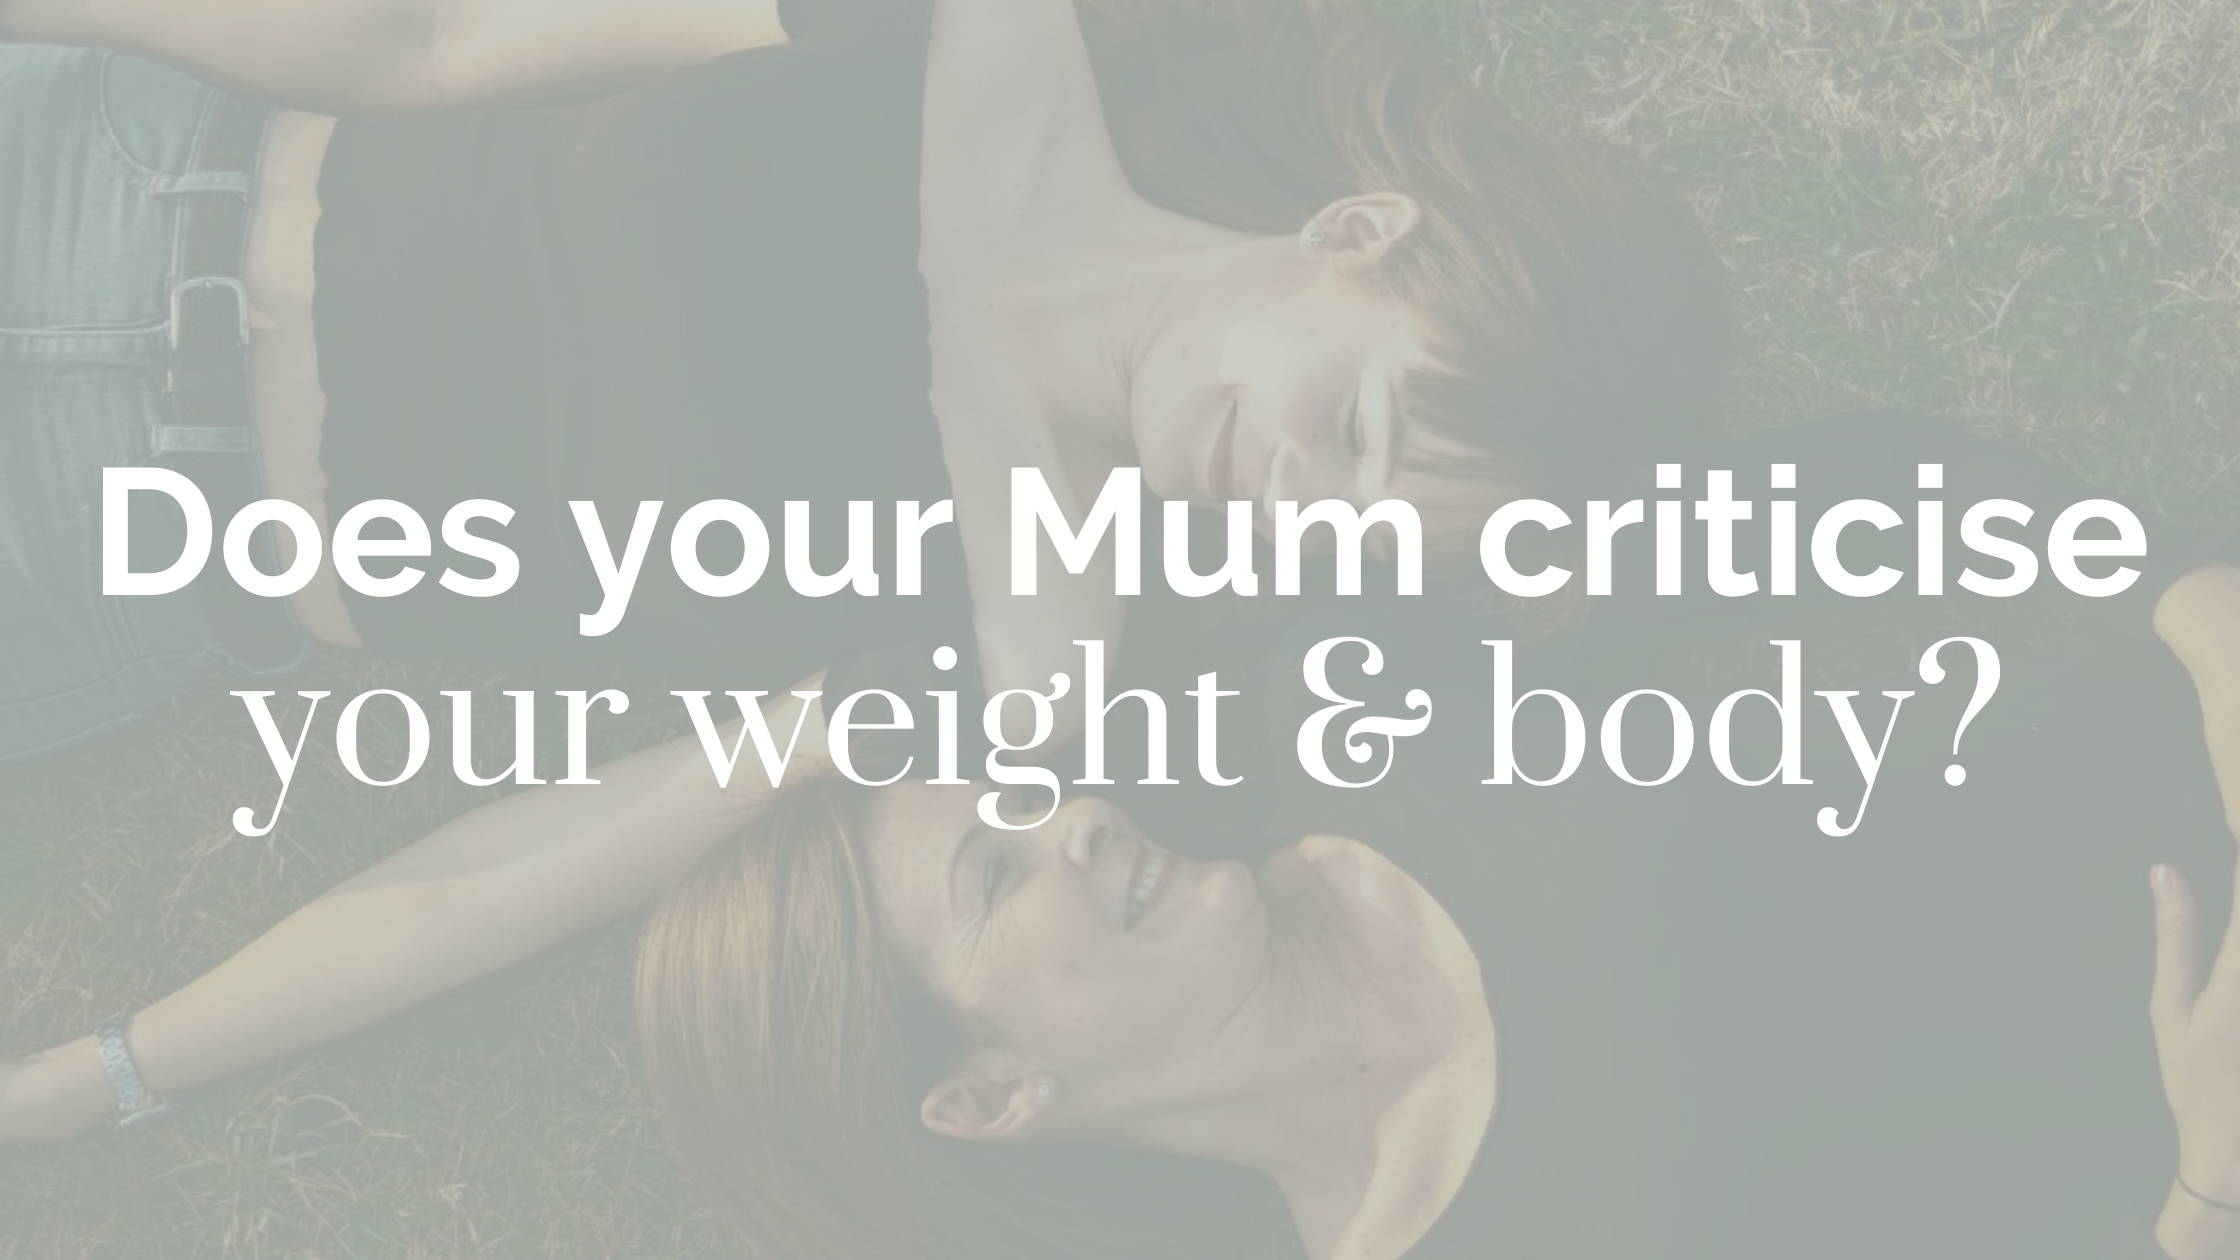 Weight and body comments do more harm than good. Image: Unsplash